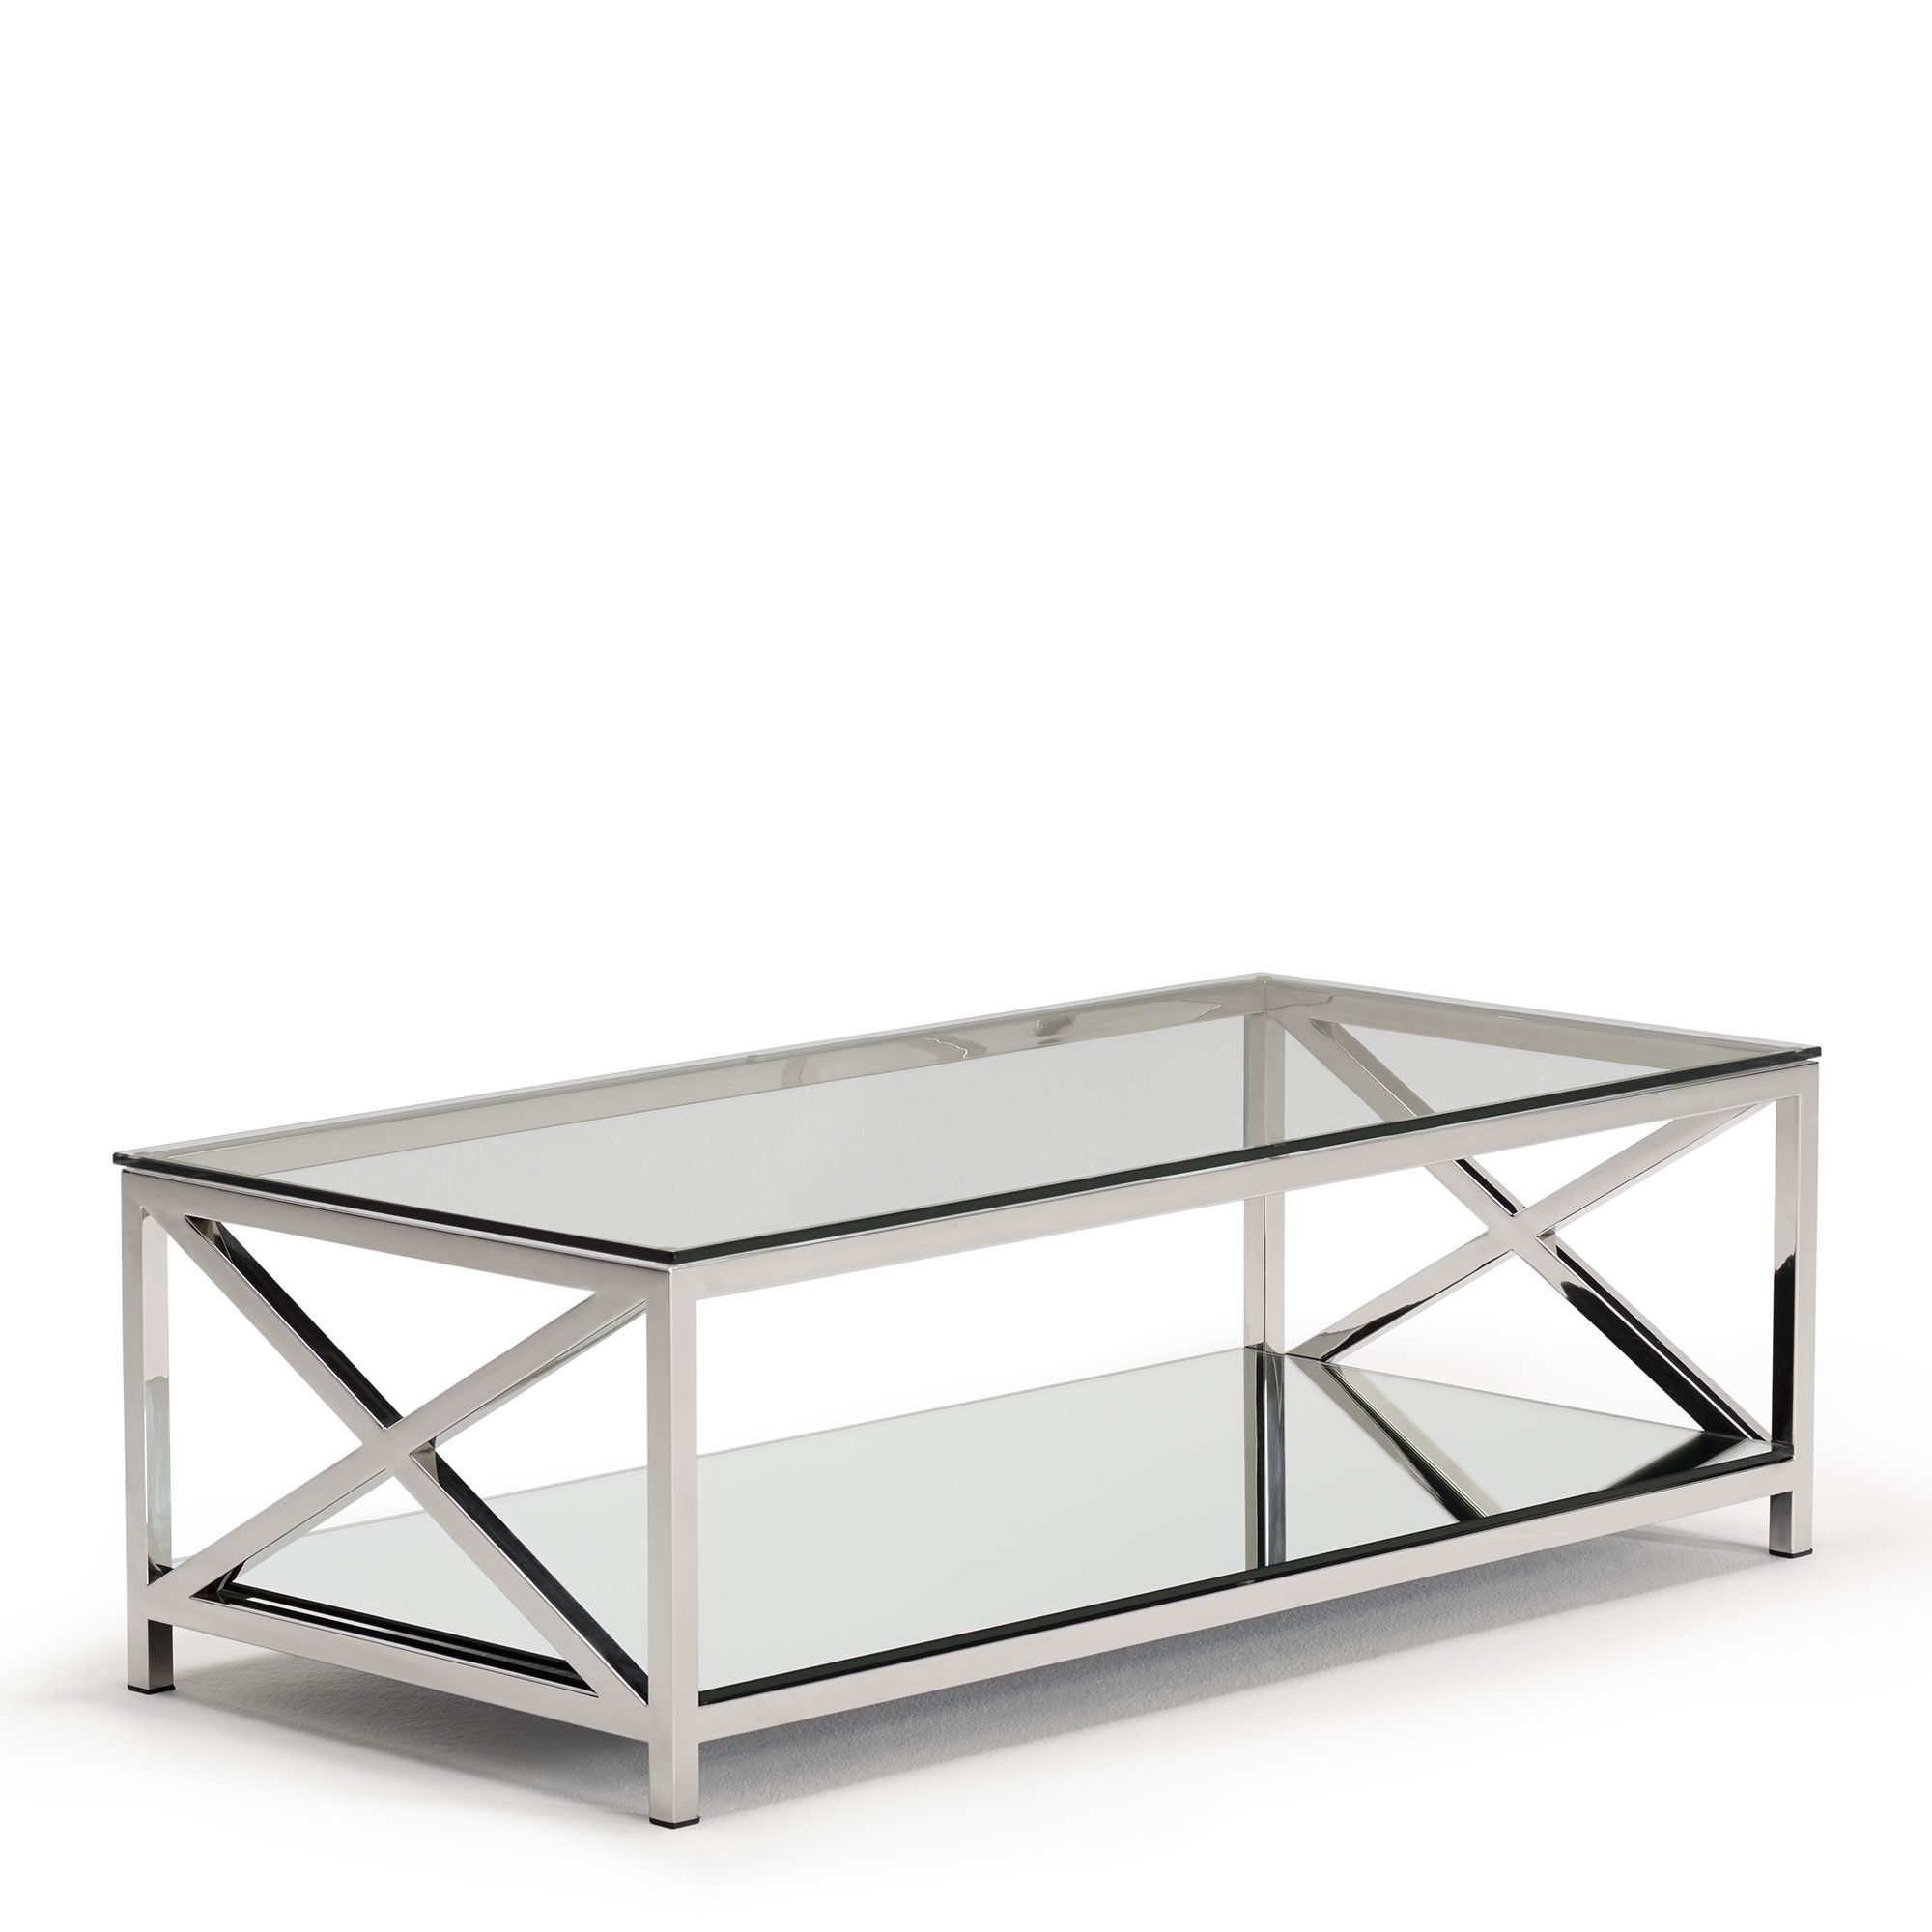 2020 Silver Stainless Steel Coffee Tables With Regard To Lucia – Coffee Table With Glass Top & Stainless Steel (Gallery 20 of 20)